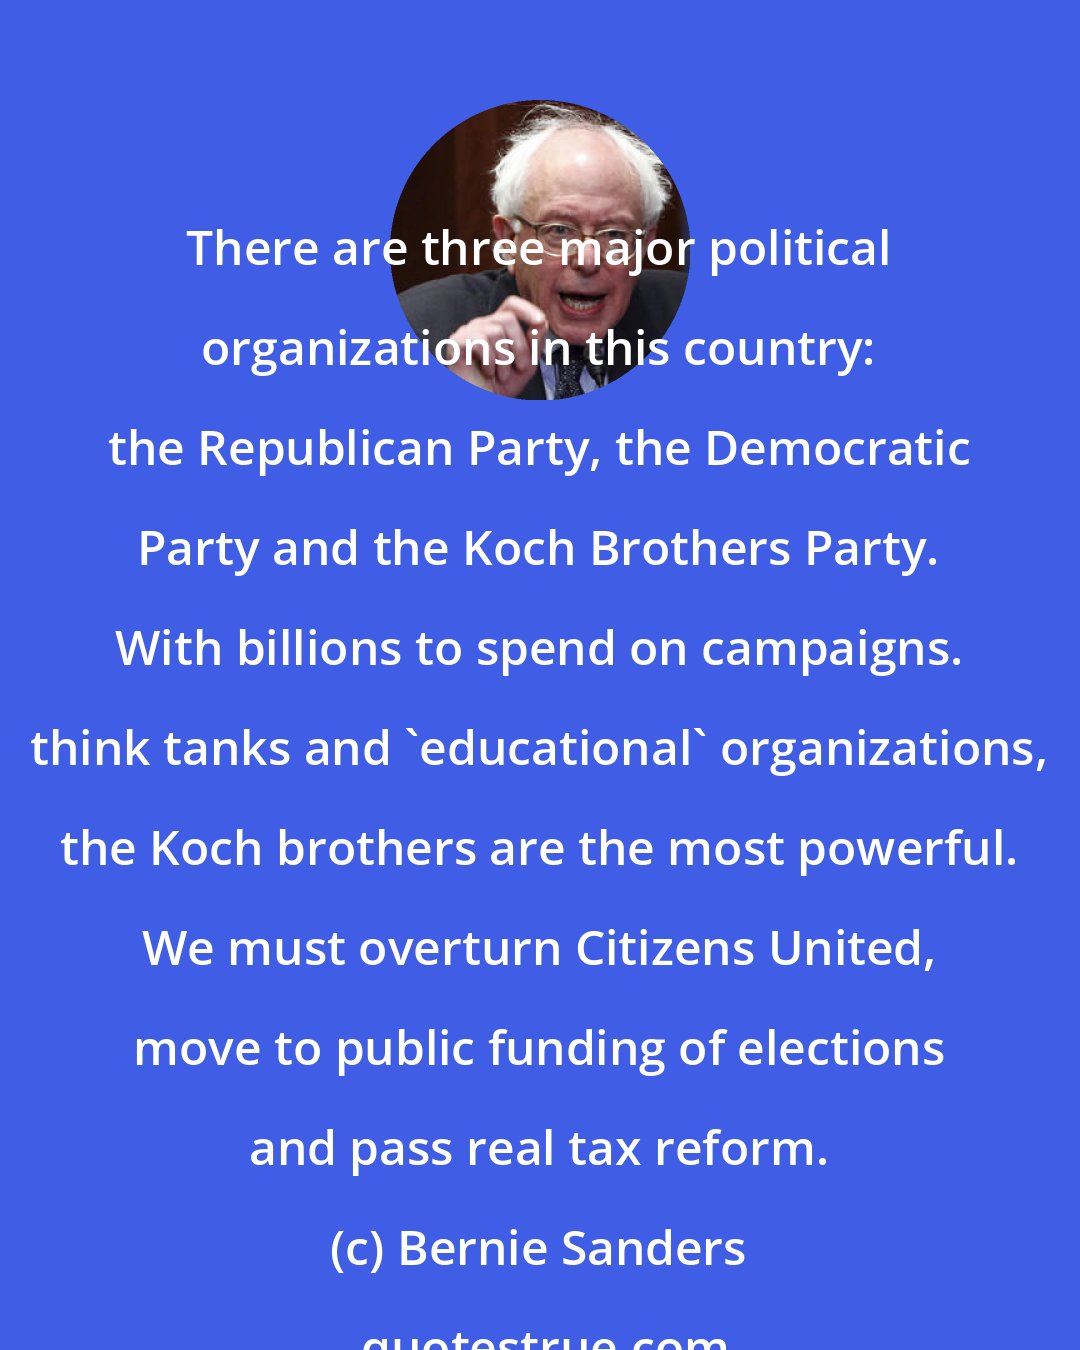 Bernie Sanders: There are three major political organizations in this country: the Republican Party, the Democratic Party and the Koch Brothers Party. With billions to spend on campaigns. think tanks and 'educational' organizations, the Koch brothers are the most powerful. We must overturn Citizens United, move to public funding of elections and pass real tax reform.